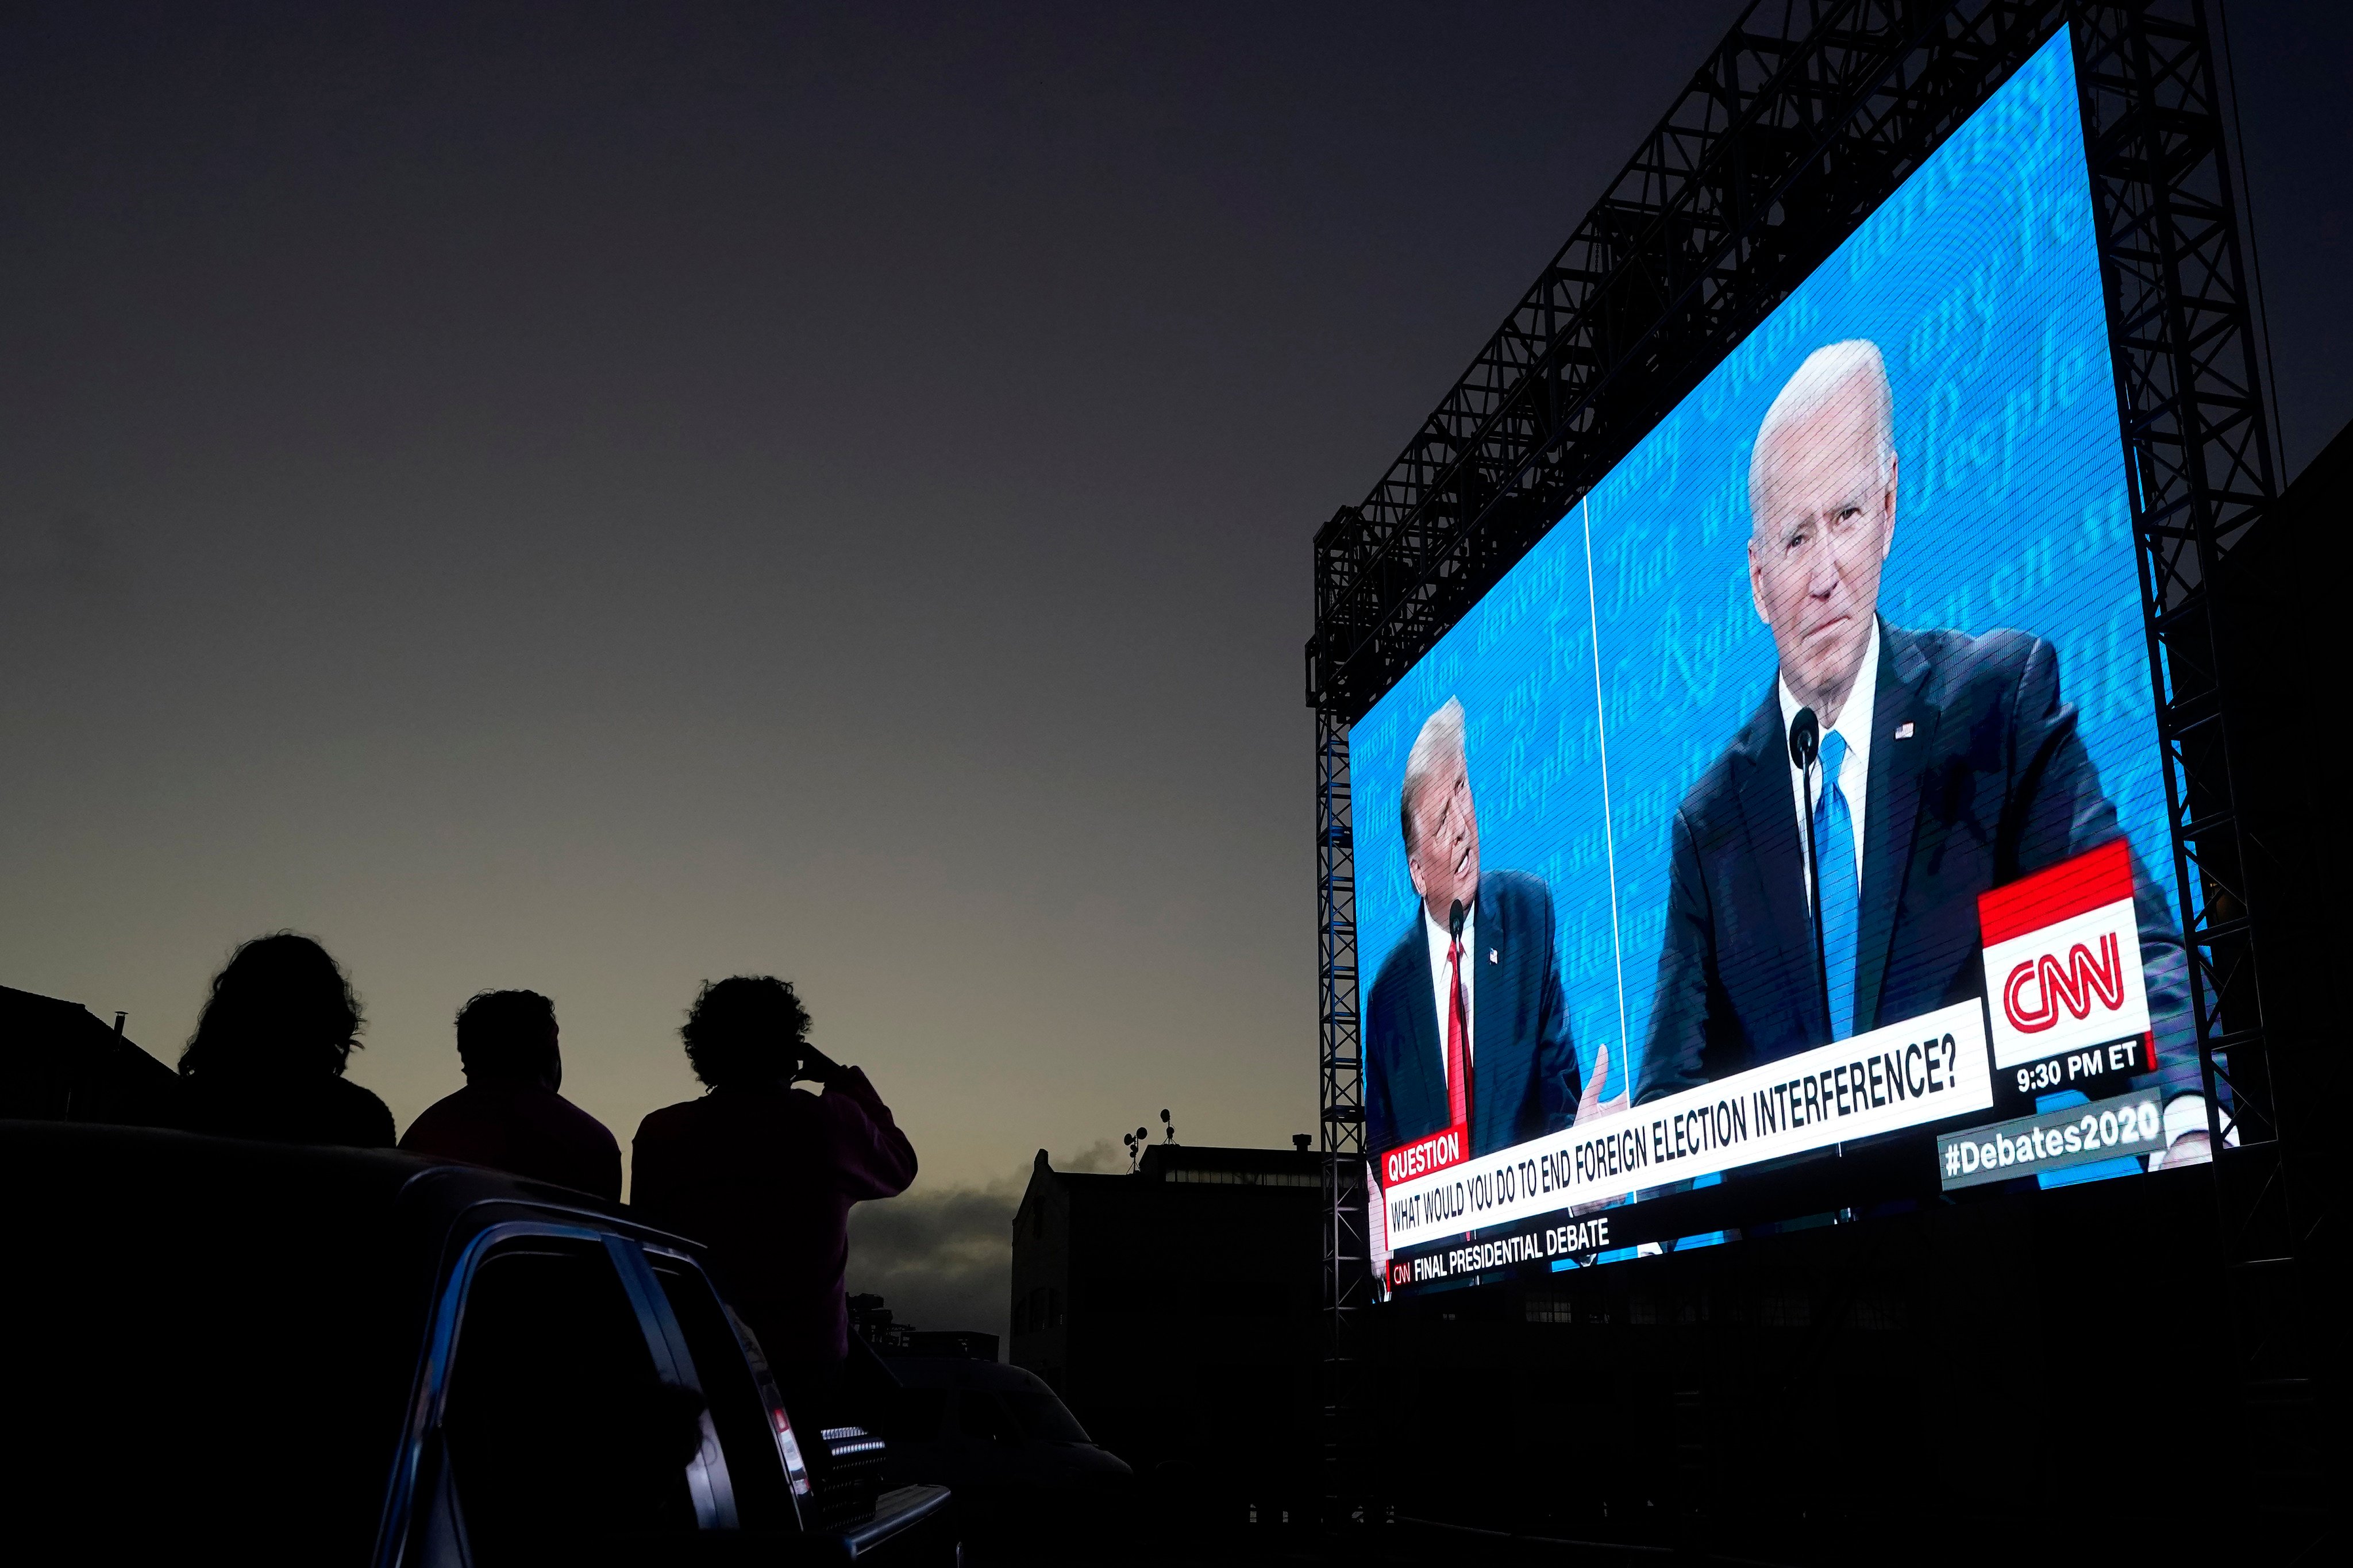 People watch from a vehicle as then-US president Donald Trump and candidate Joe Biden speak during a presidential debate watch party, at Fort Mason Centre in San Francisco, on October 22, 2020. Though the prospect does not appear popular among US voters, the 2024 election seems likely to come down to a rematch between the two. Photo: AP